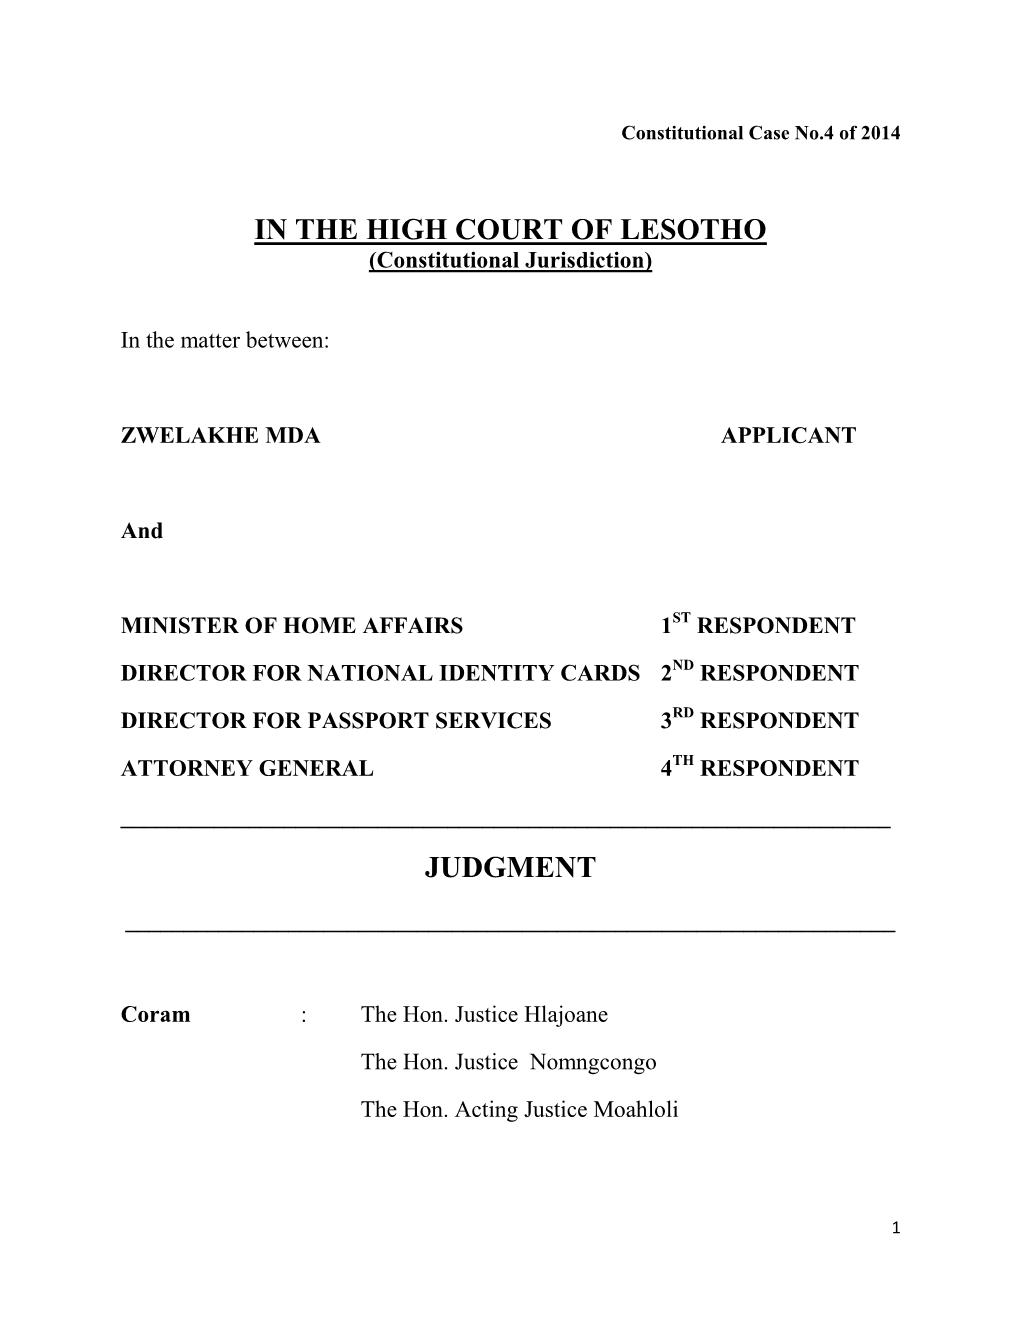 In the High Court of Lesotho Judgment